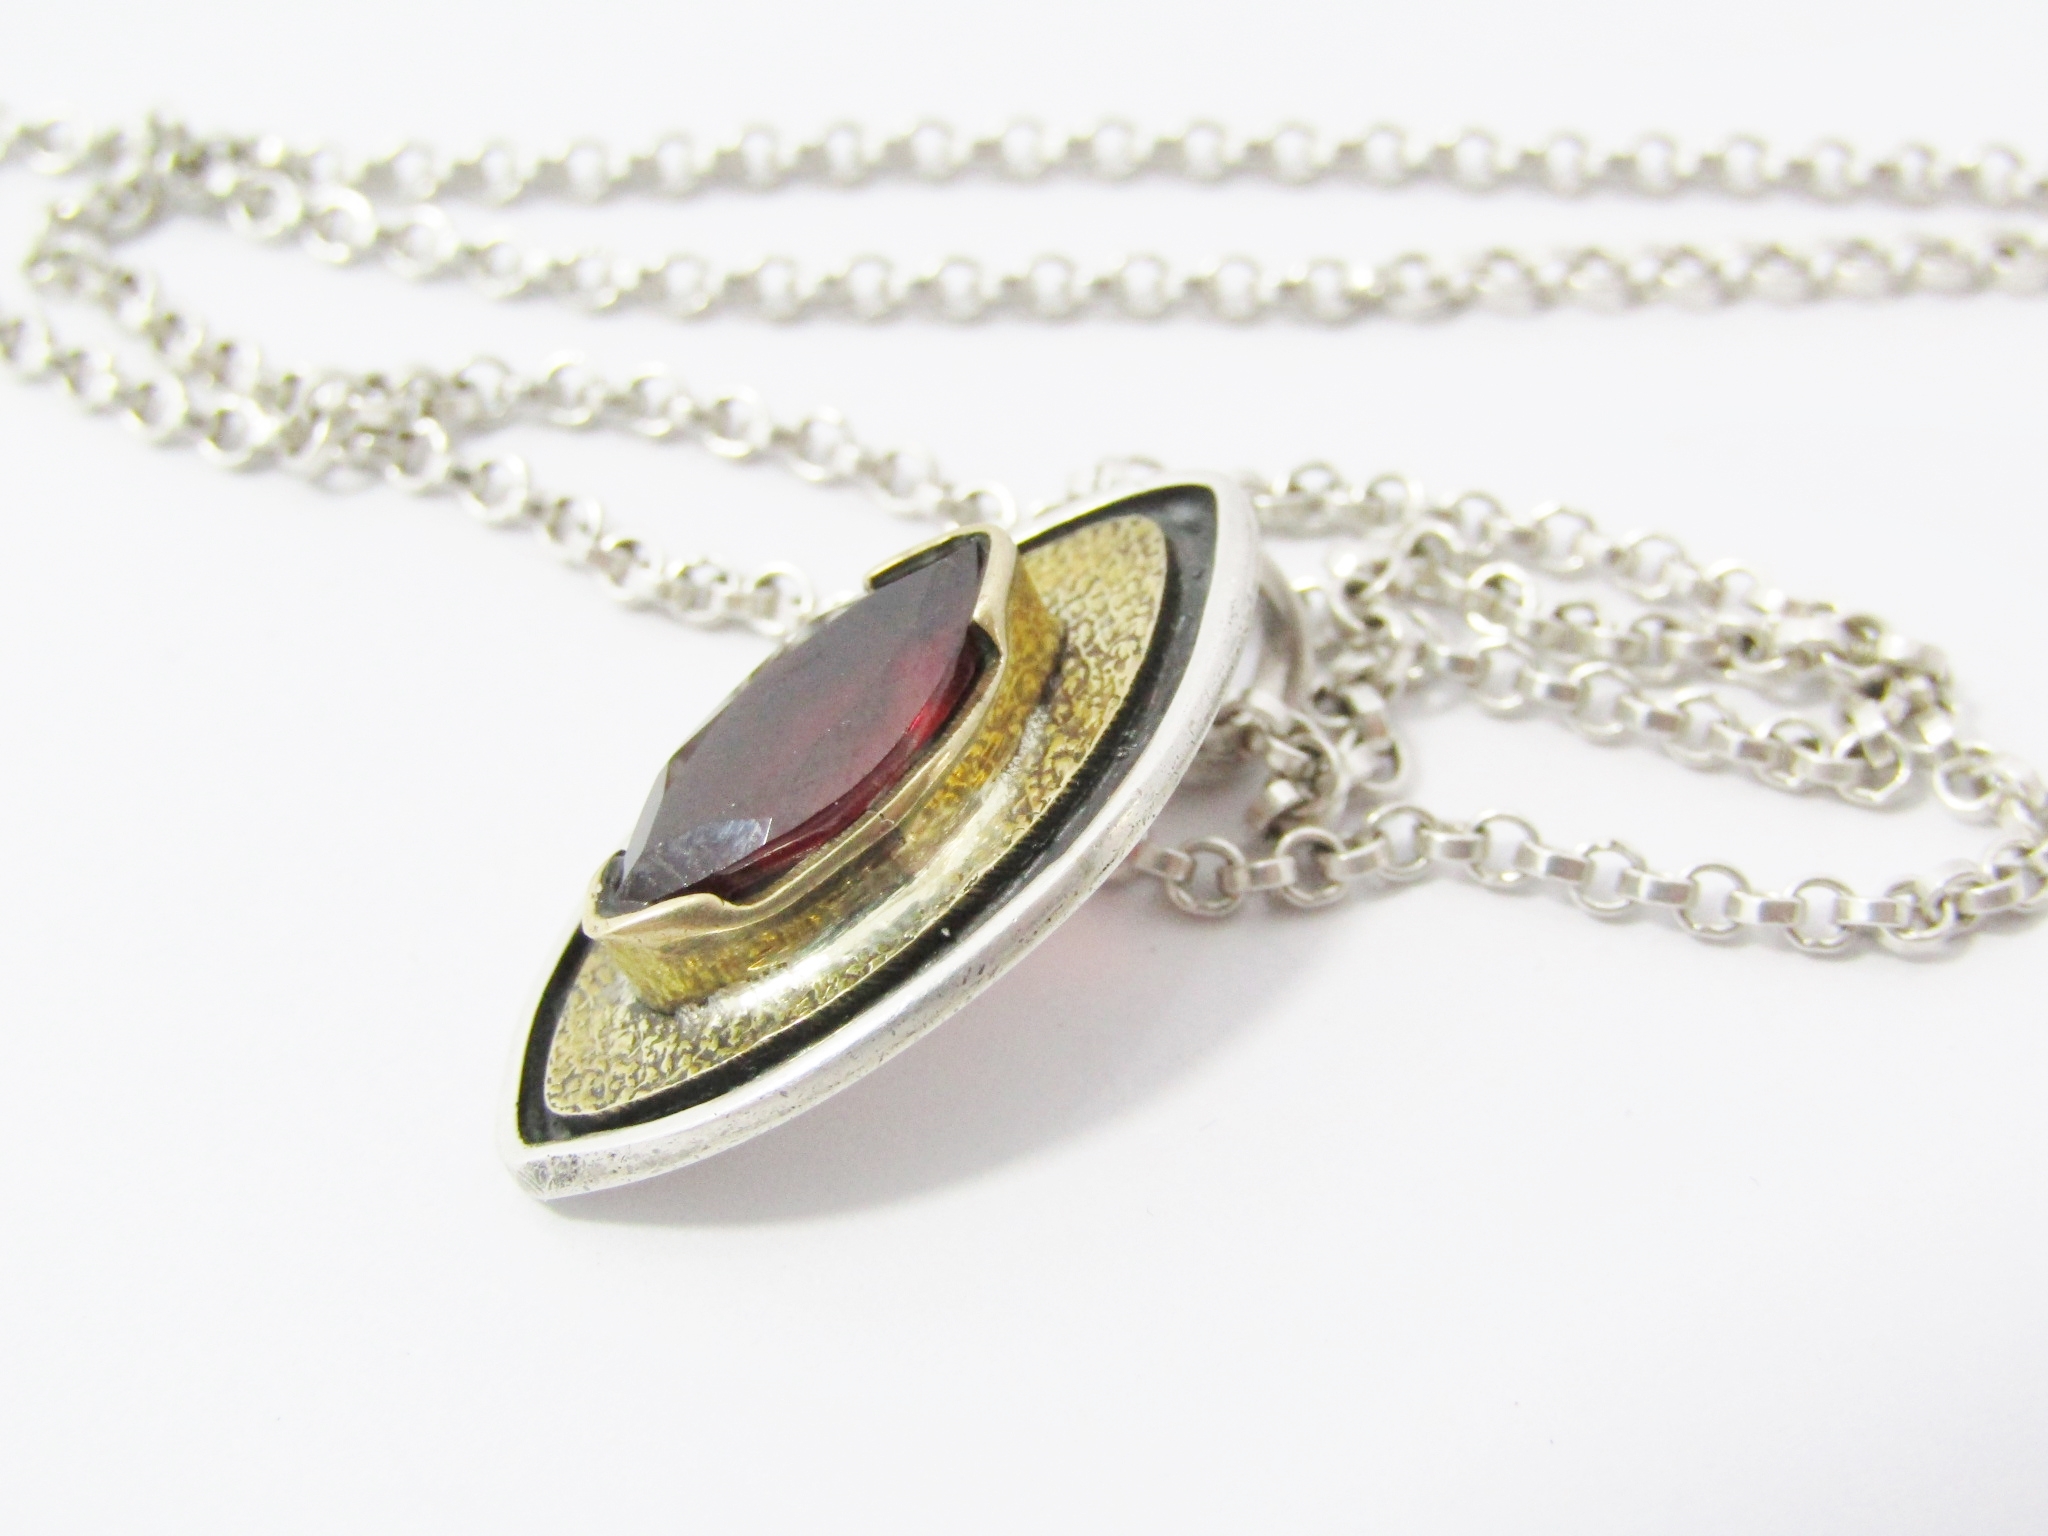 Stunning Two Tone Bronze And Silver Pendant With a Garnet On Chain in Sterling Silver.